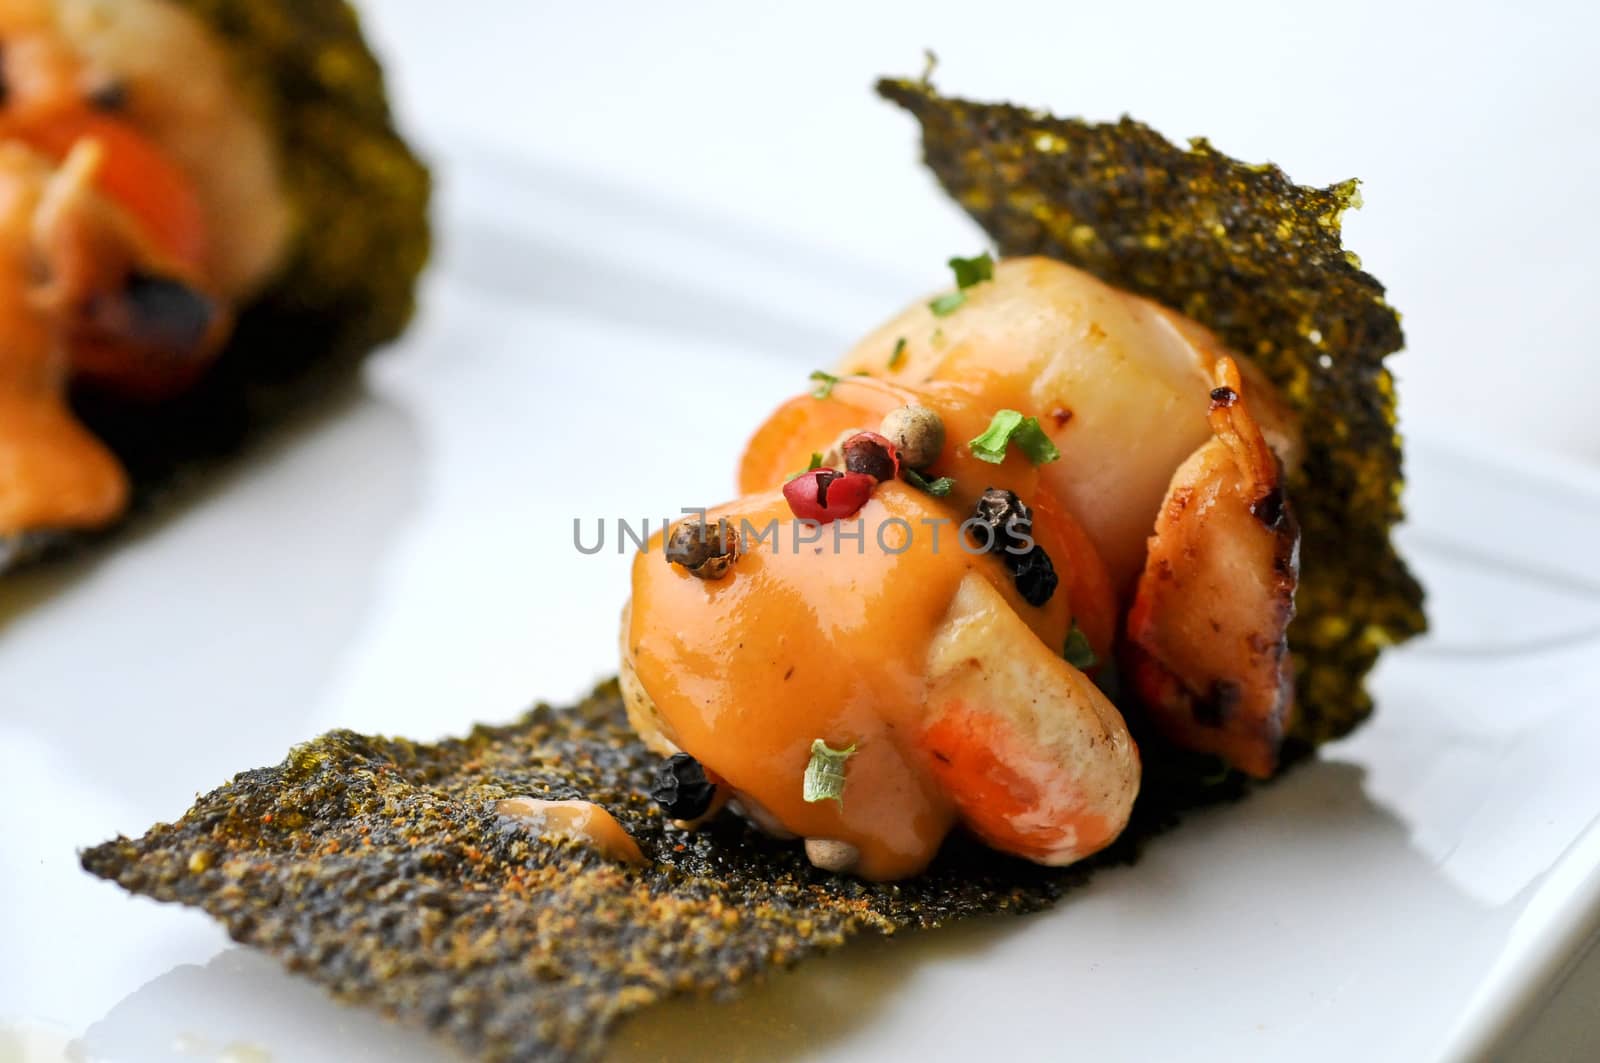 Delicacy grilled scallops with sour sauce on crispy seaweed by eyeofpaul